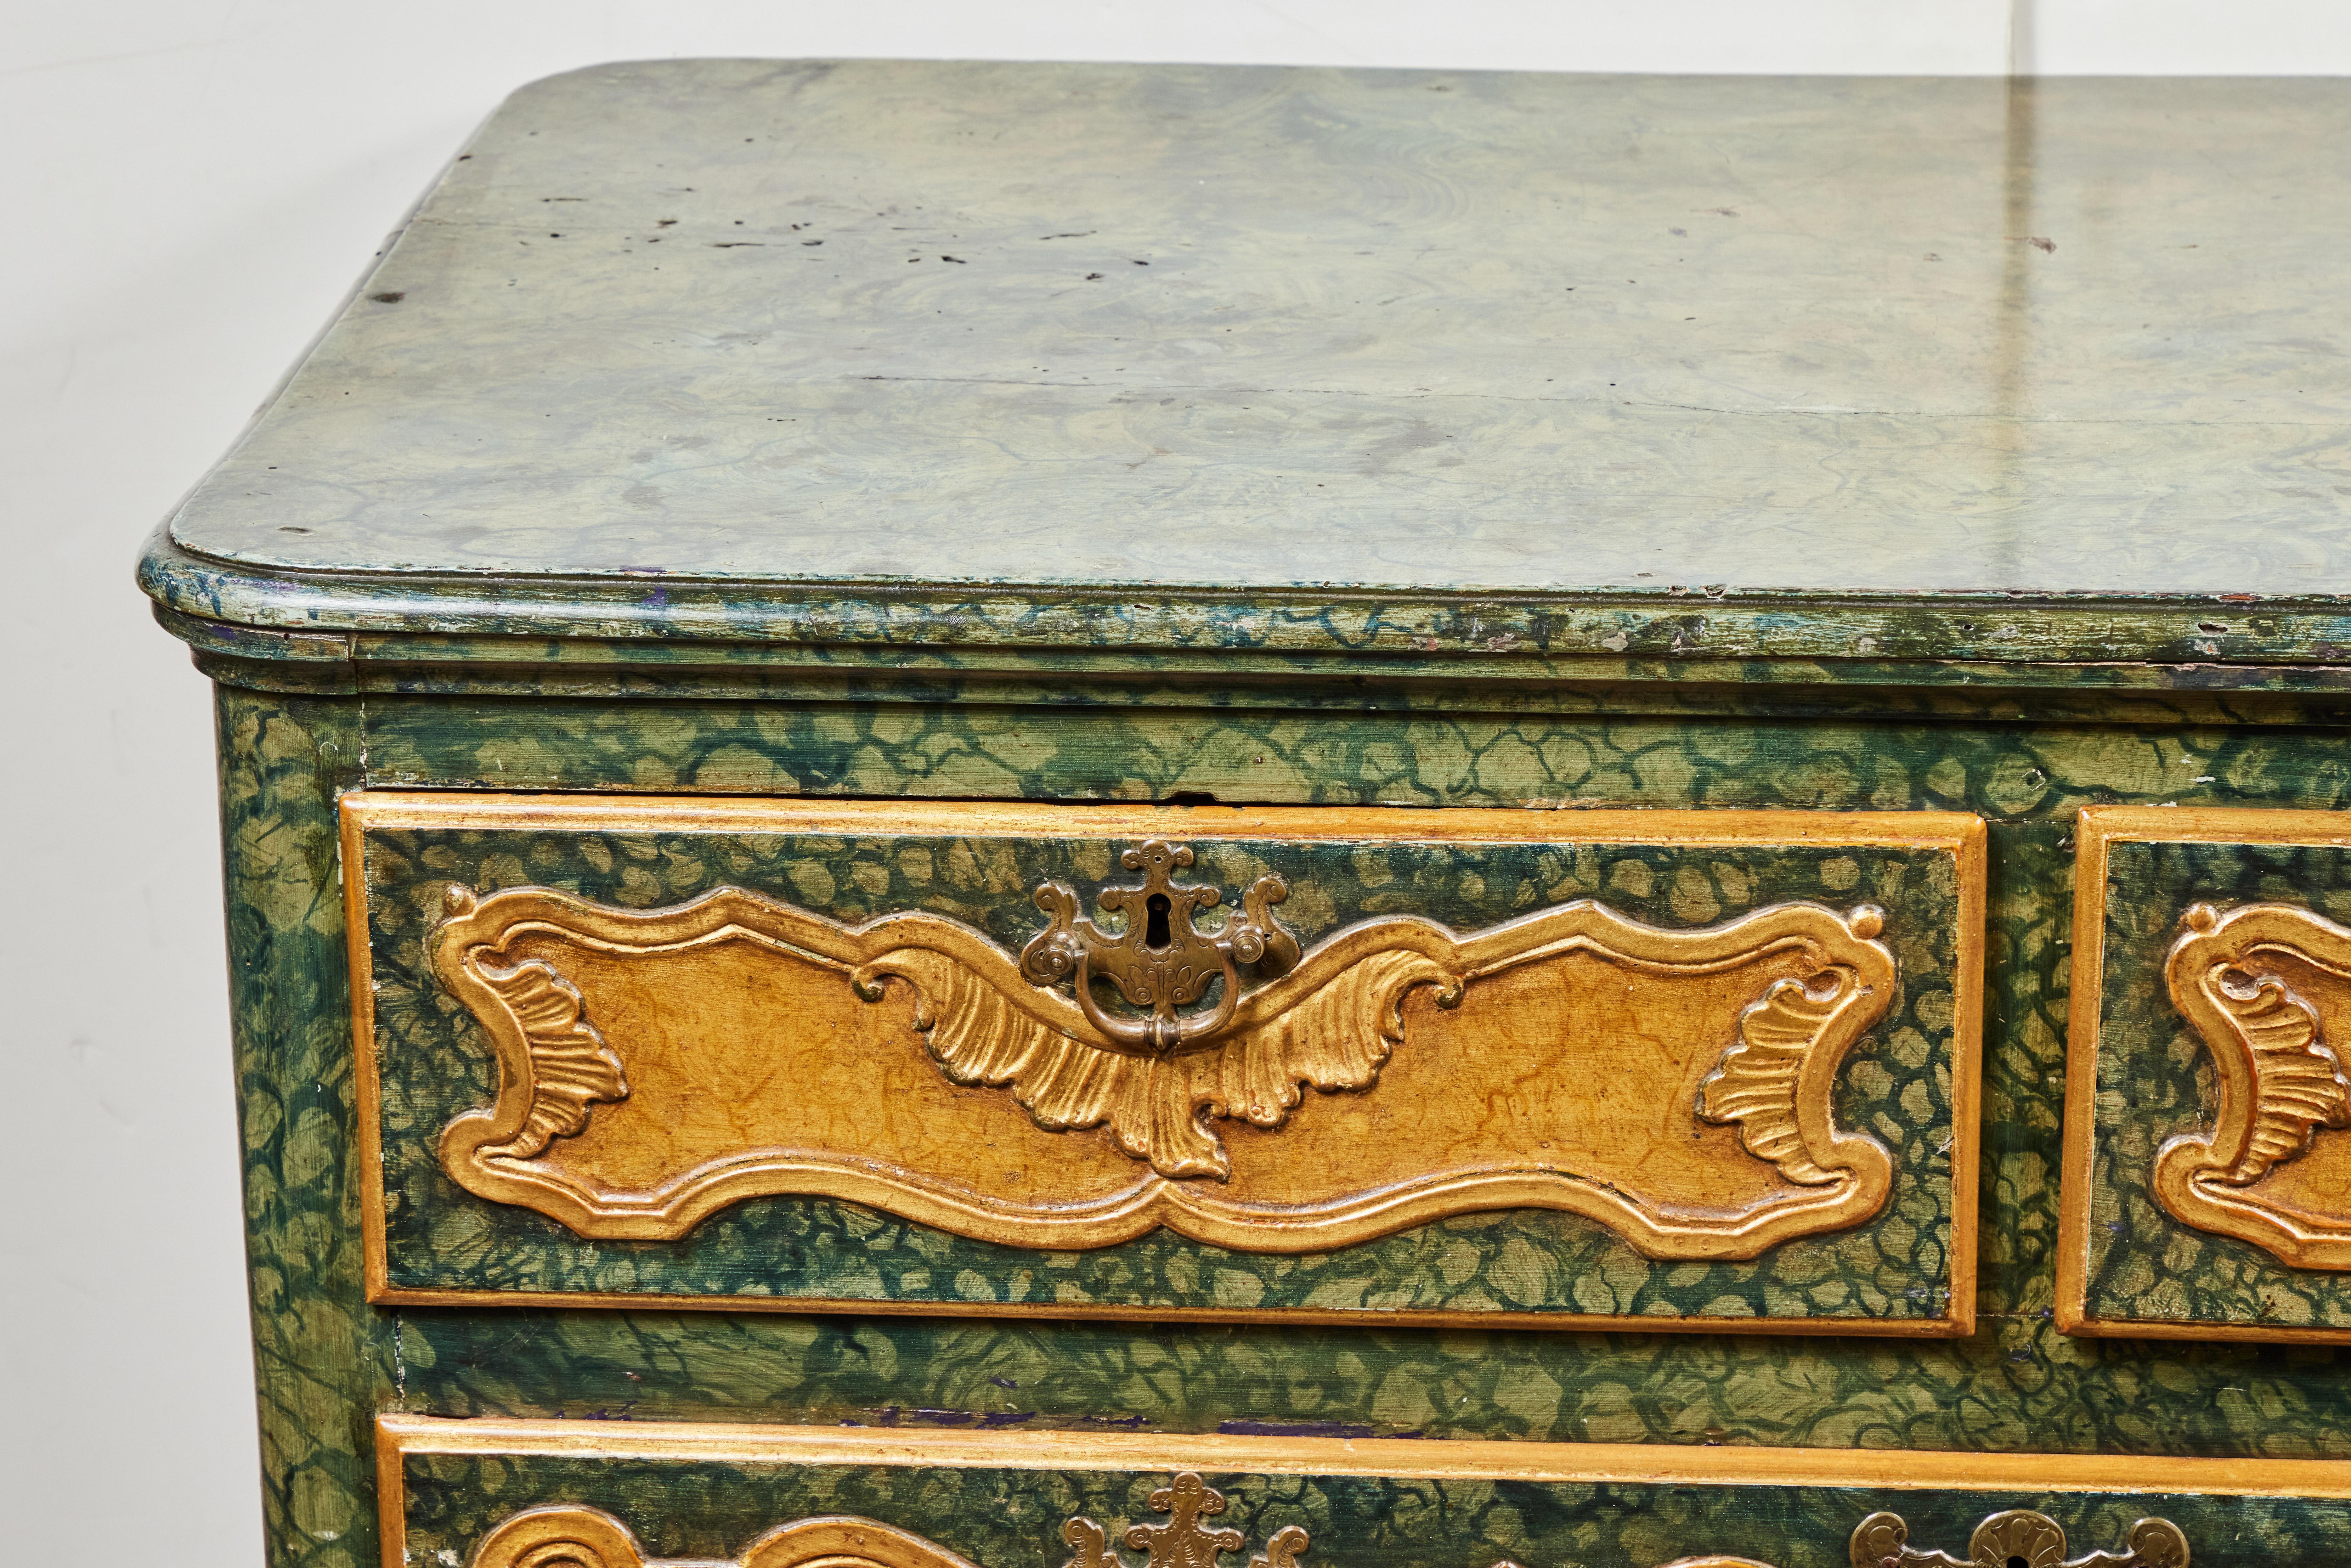 A striking, c. 1800 hand-carved, painted, and parcel gilt Venetian commode with three, sinuously paneled drawers. The whole in faux verde and Siena marbling and further embellished with gesso and 22k gold gilding. The whole above a dramatic,